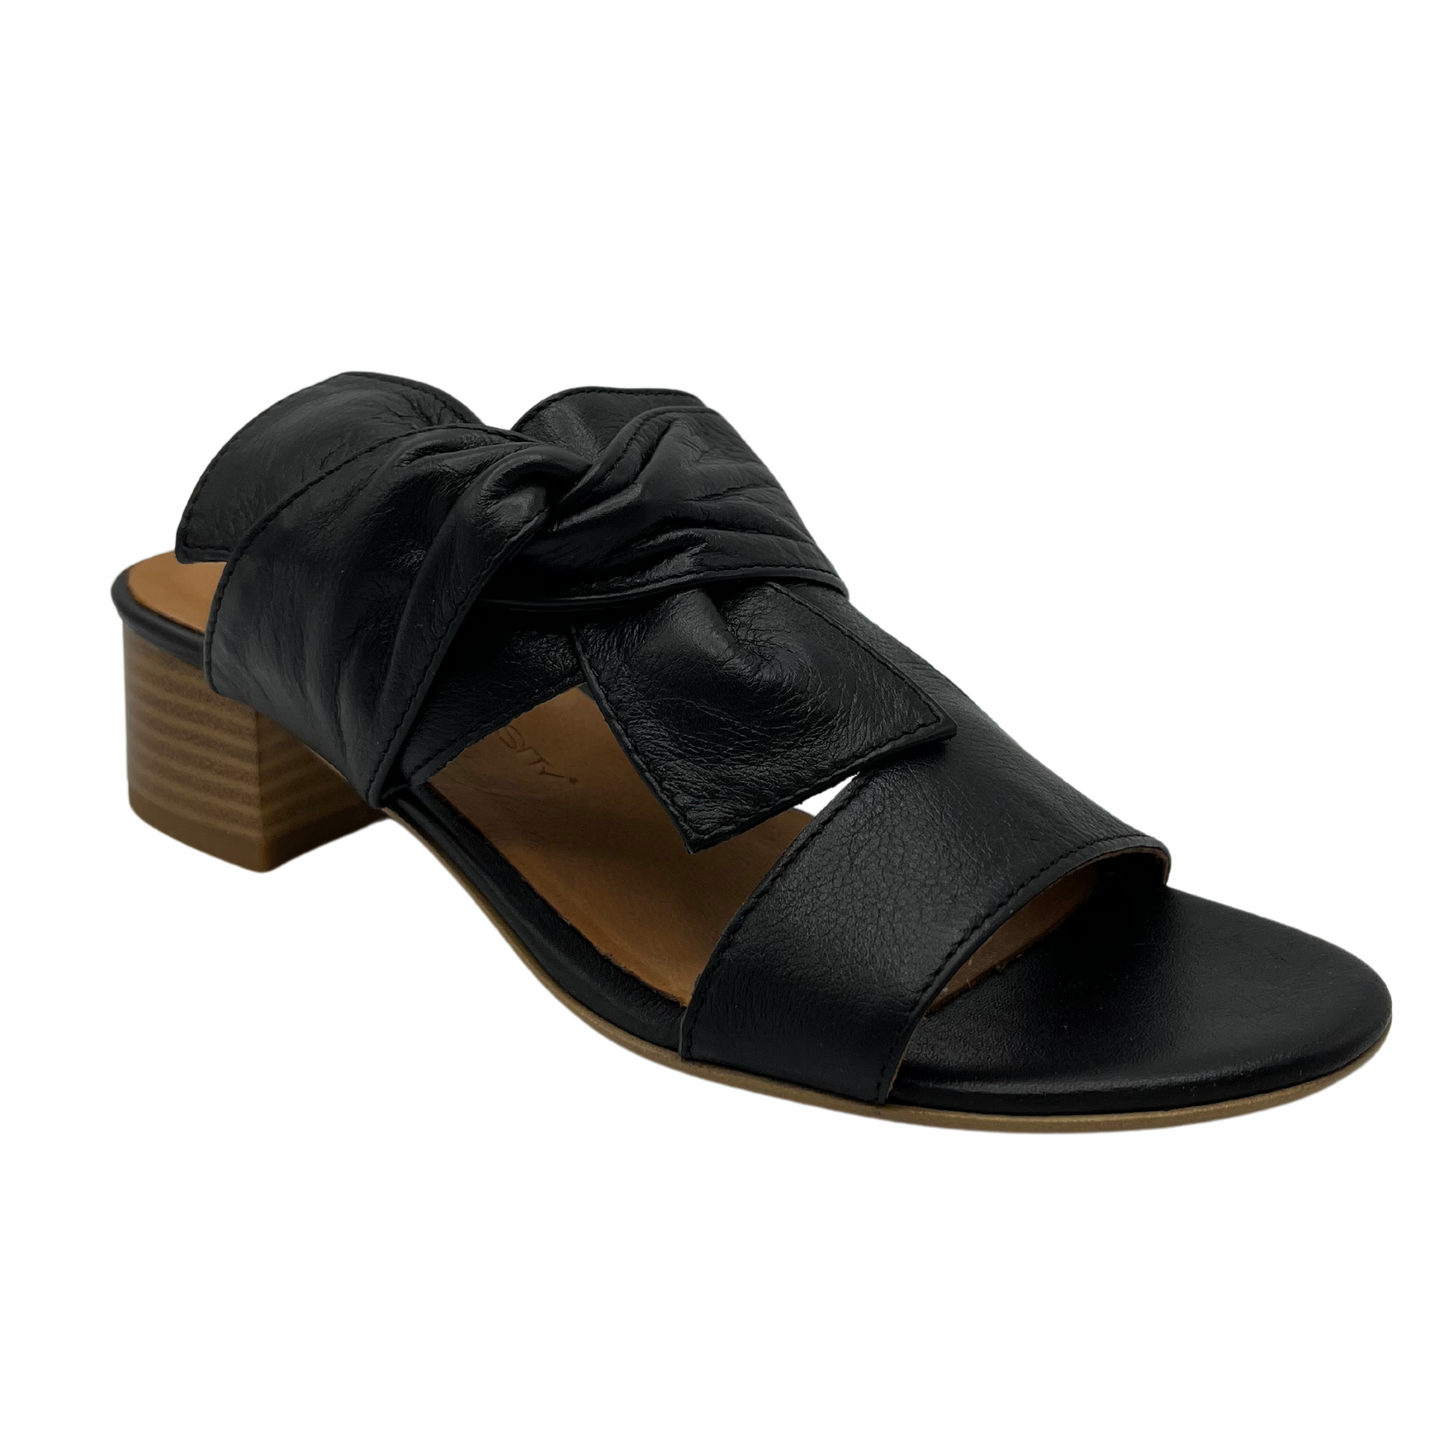 45 degree angled view of black leather sandal with block heel and knot detail. 